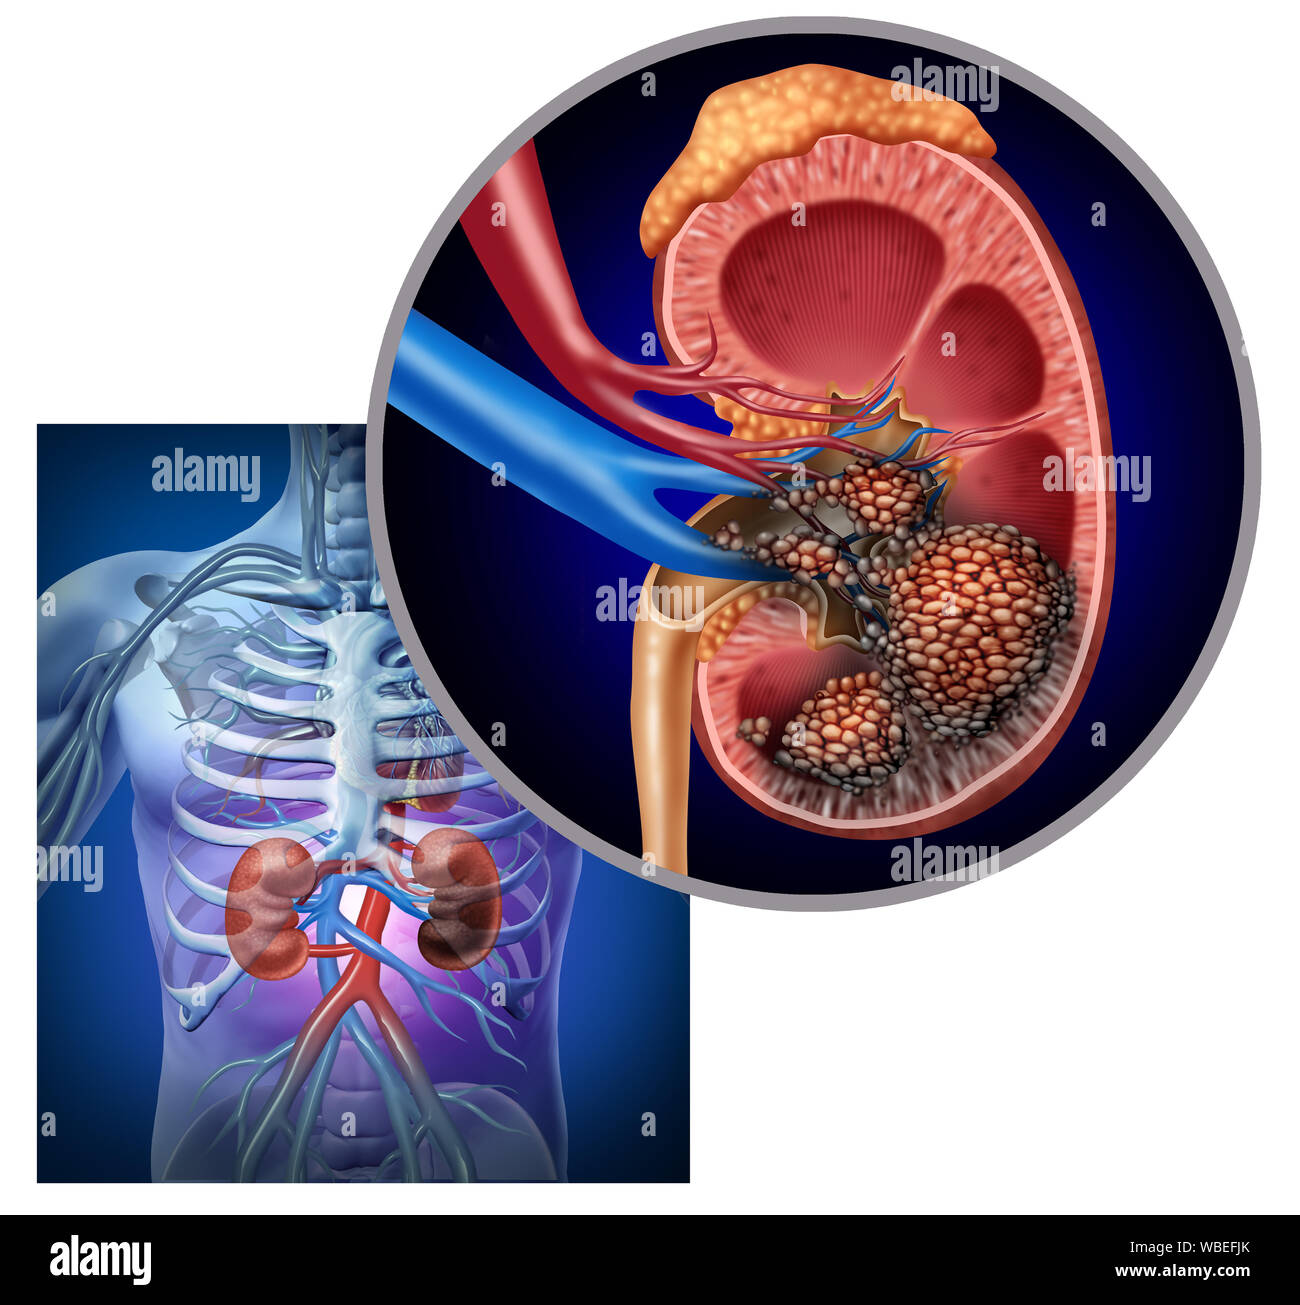 Cancer of the kidney medical concept as malignant cells in a human body attacking the urinary system and renal anatomy. Stock Photo